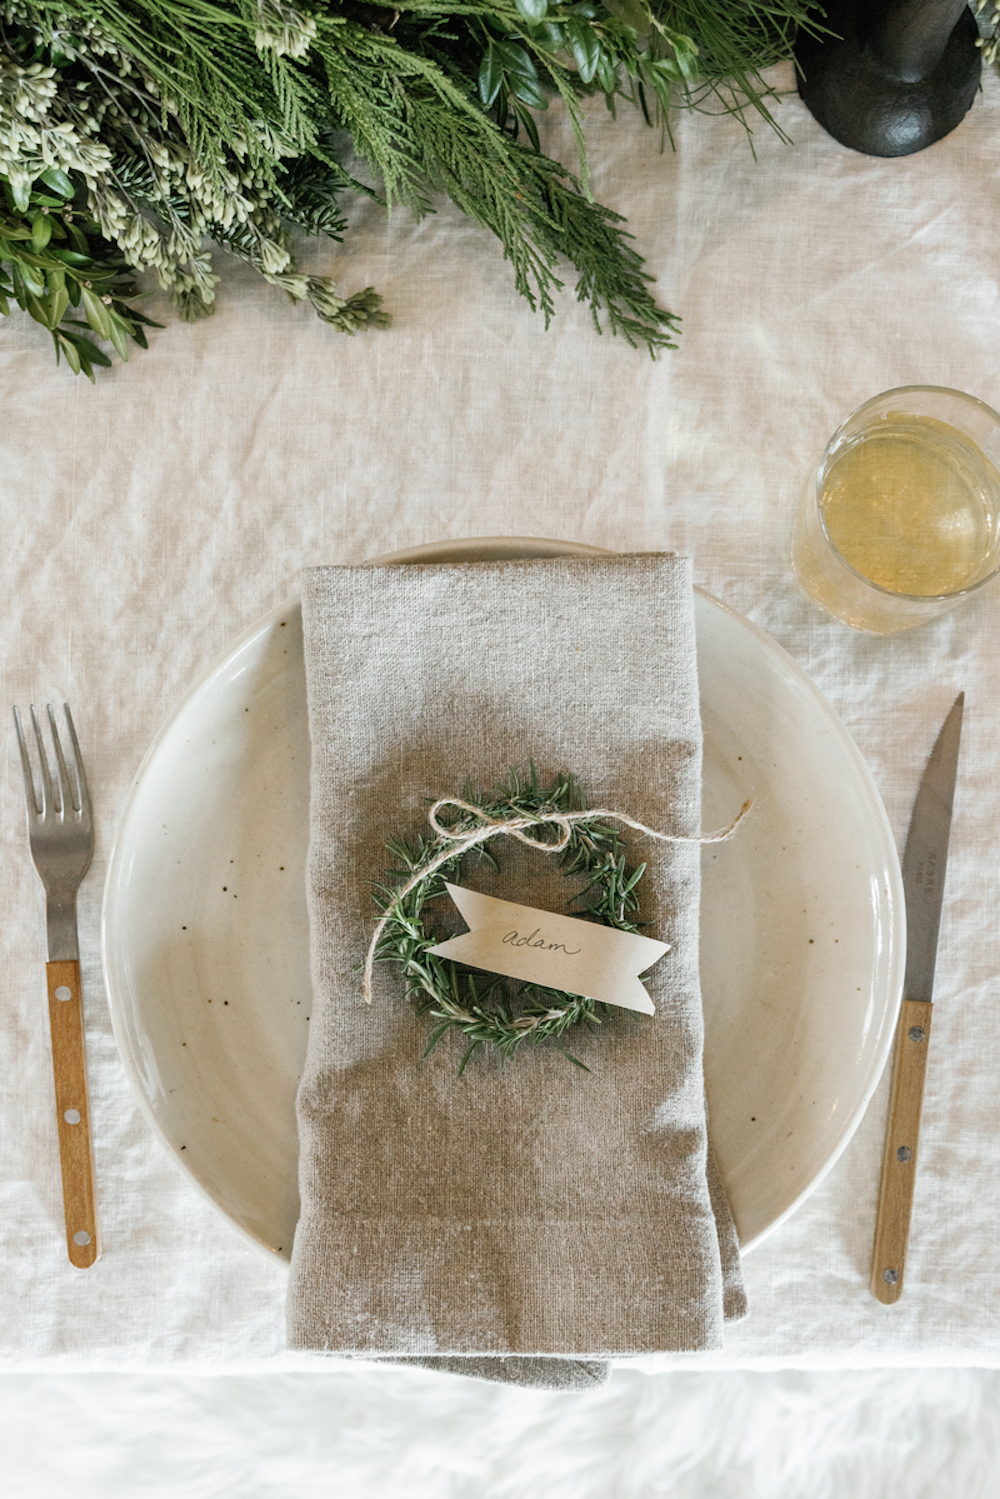 Simple holiday table setting with stoneware plate, wooden-handled silverware, clear wine glass, gray linen napkin, and rosemary wreath placecard.